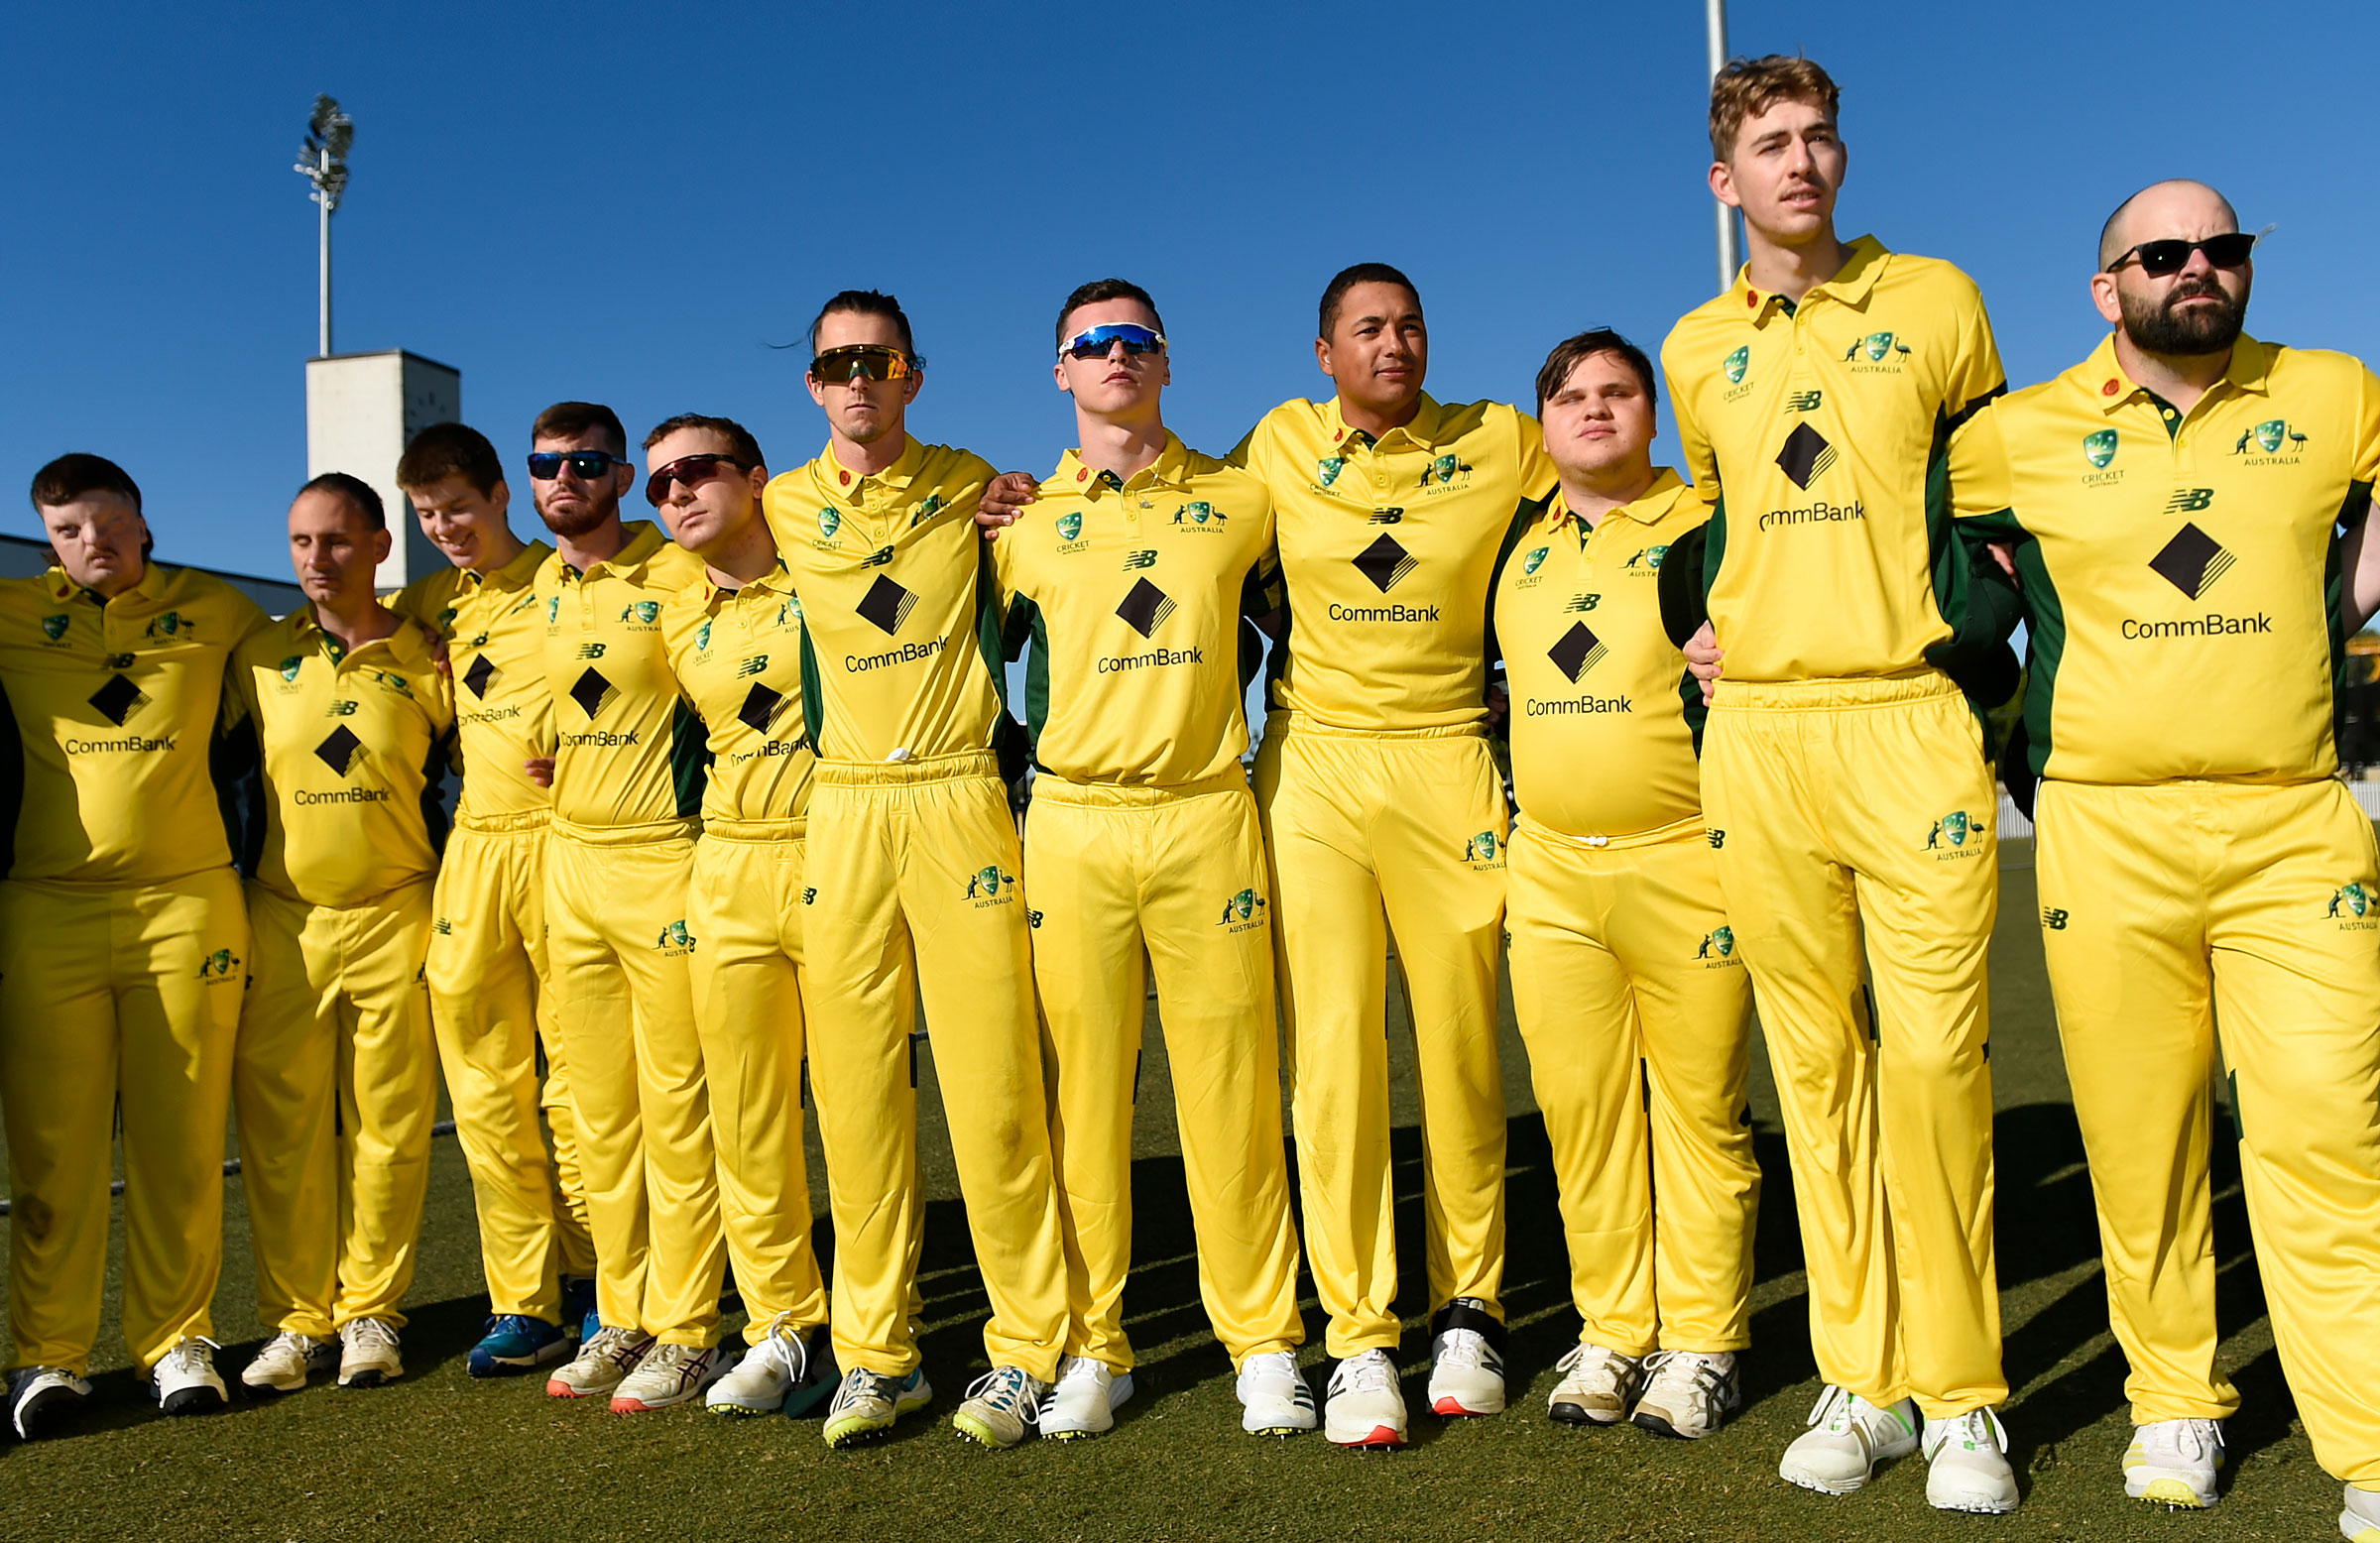 The Australian Blind cricket team lined up for a photo at an international game